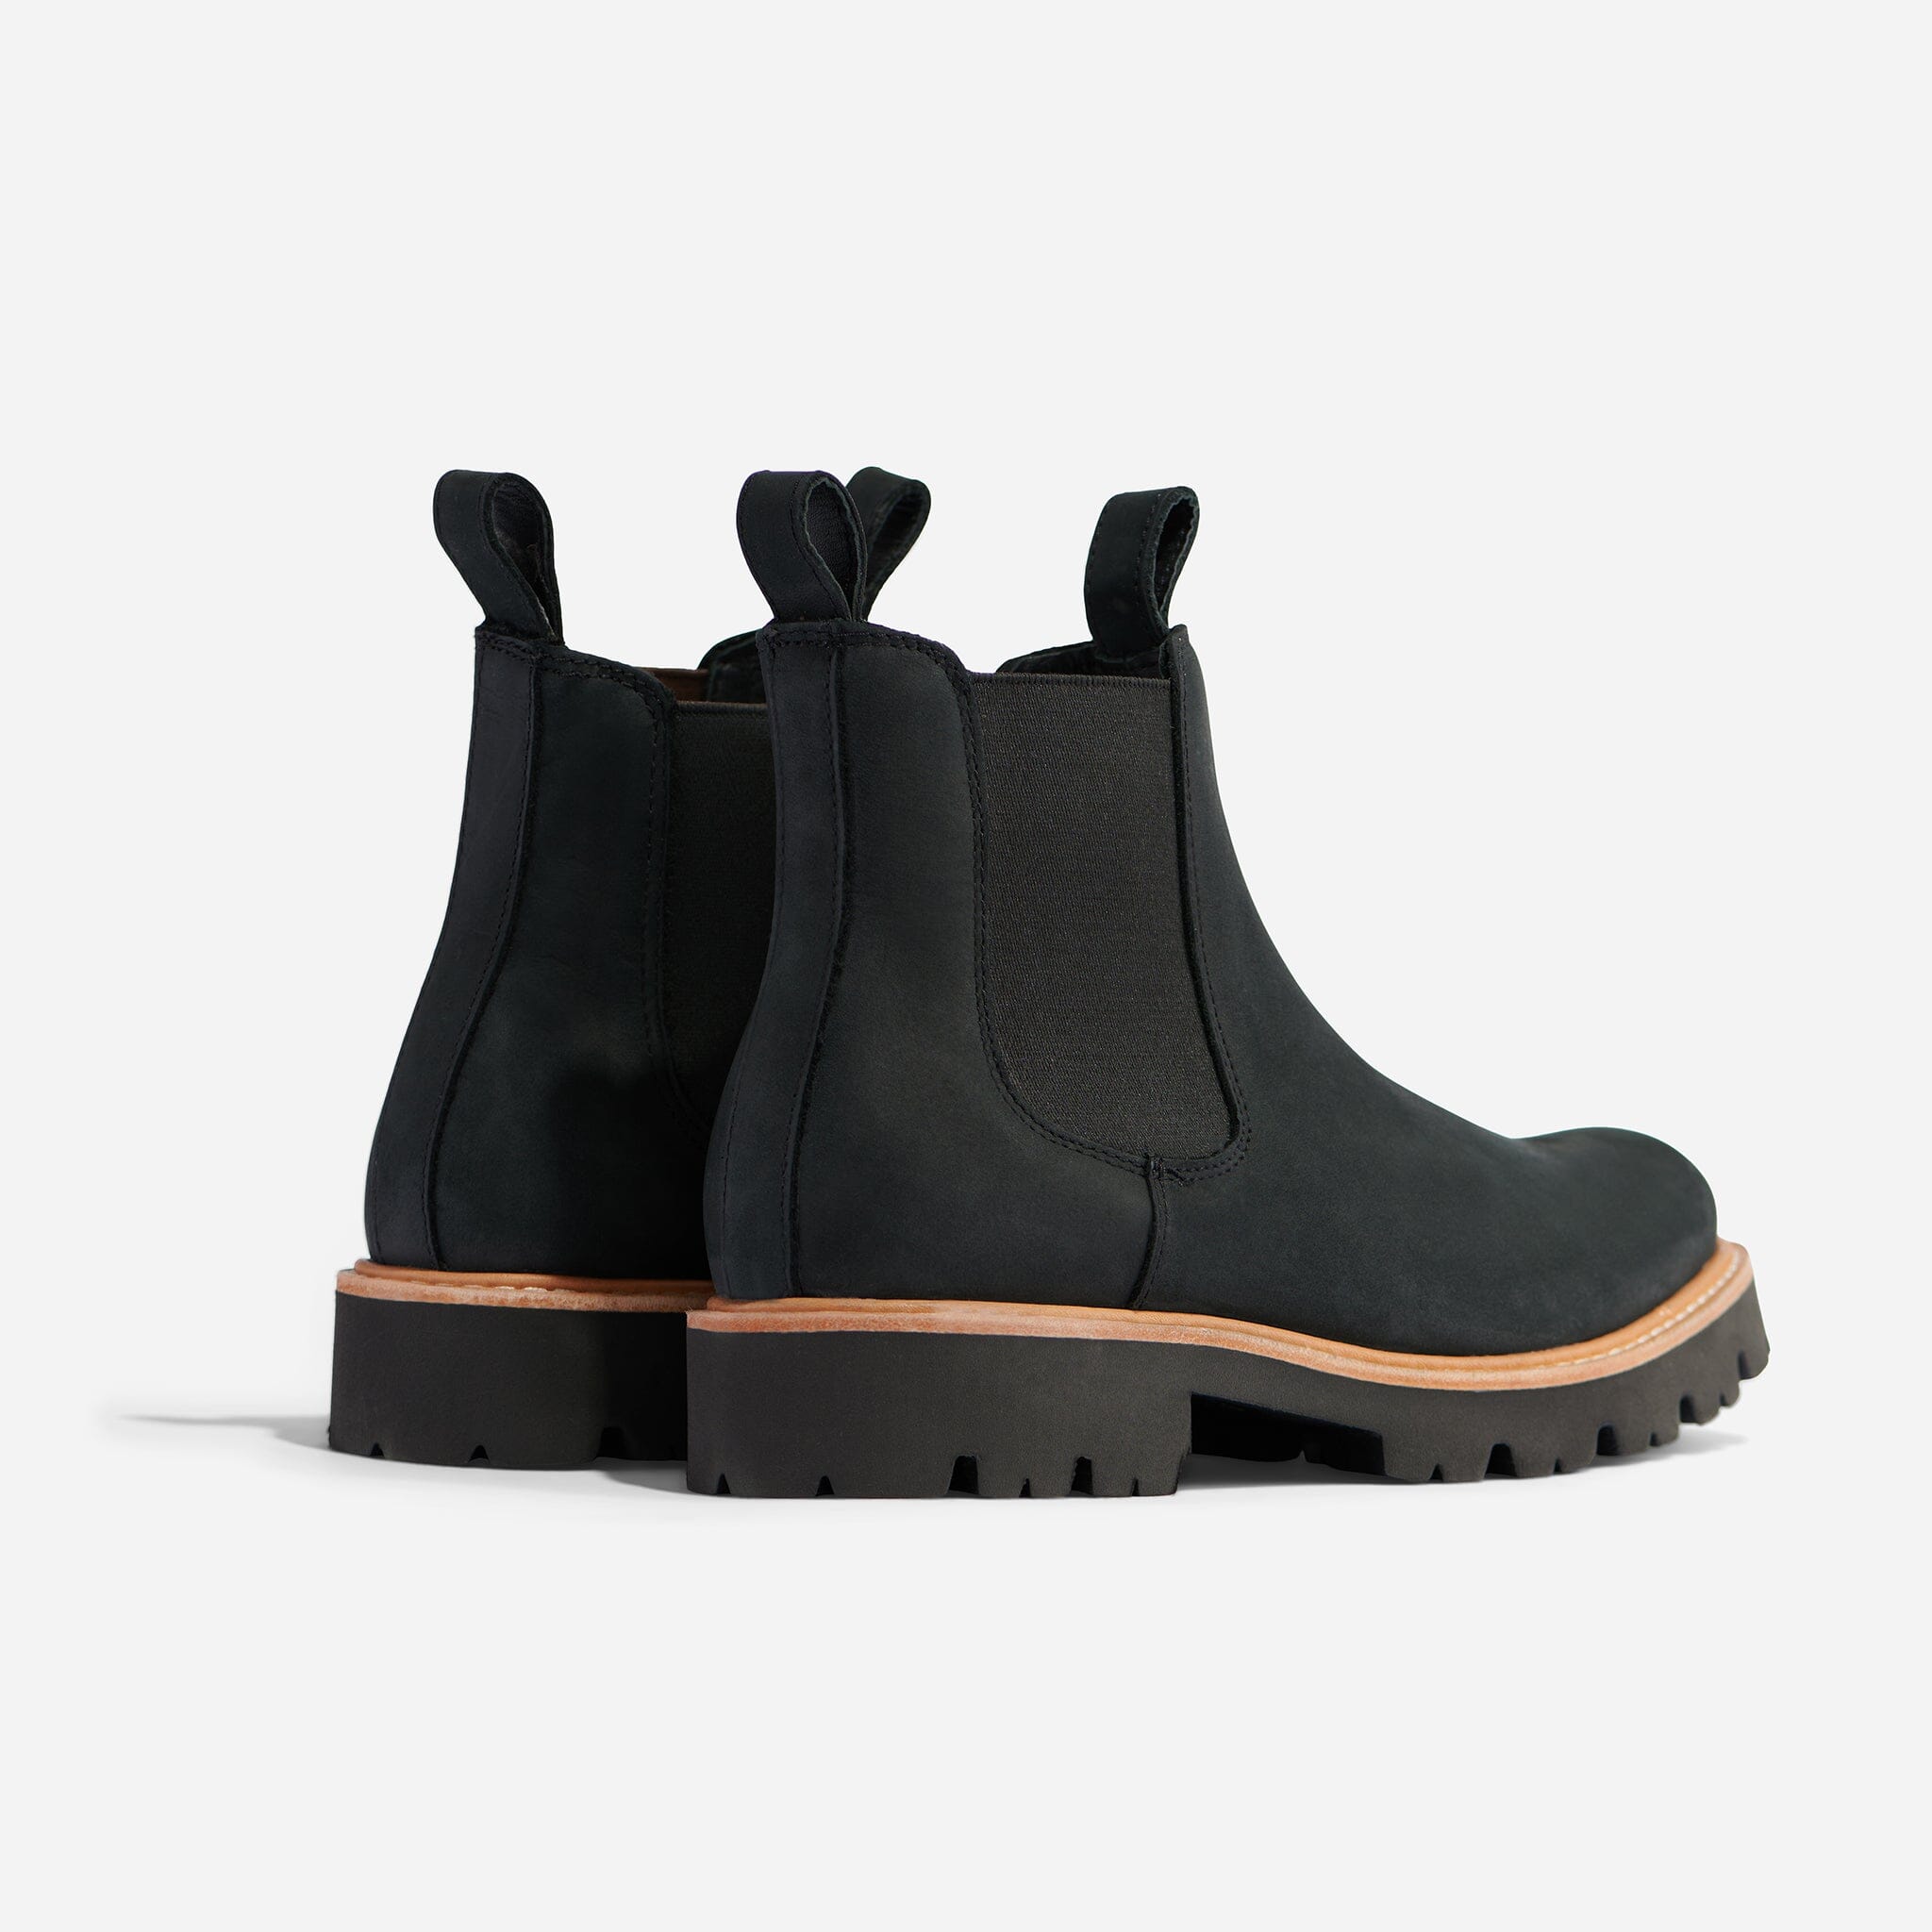 Go-To Lug Chelsea Boot Black Women's Leather Boot Nisolo 